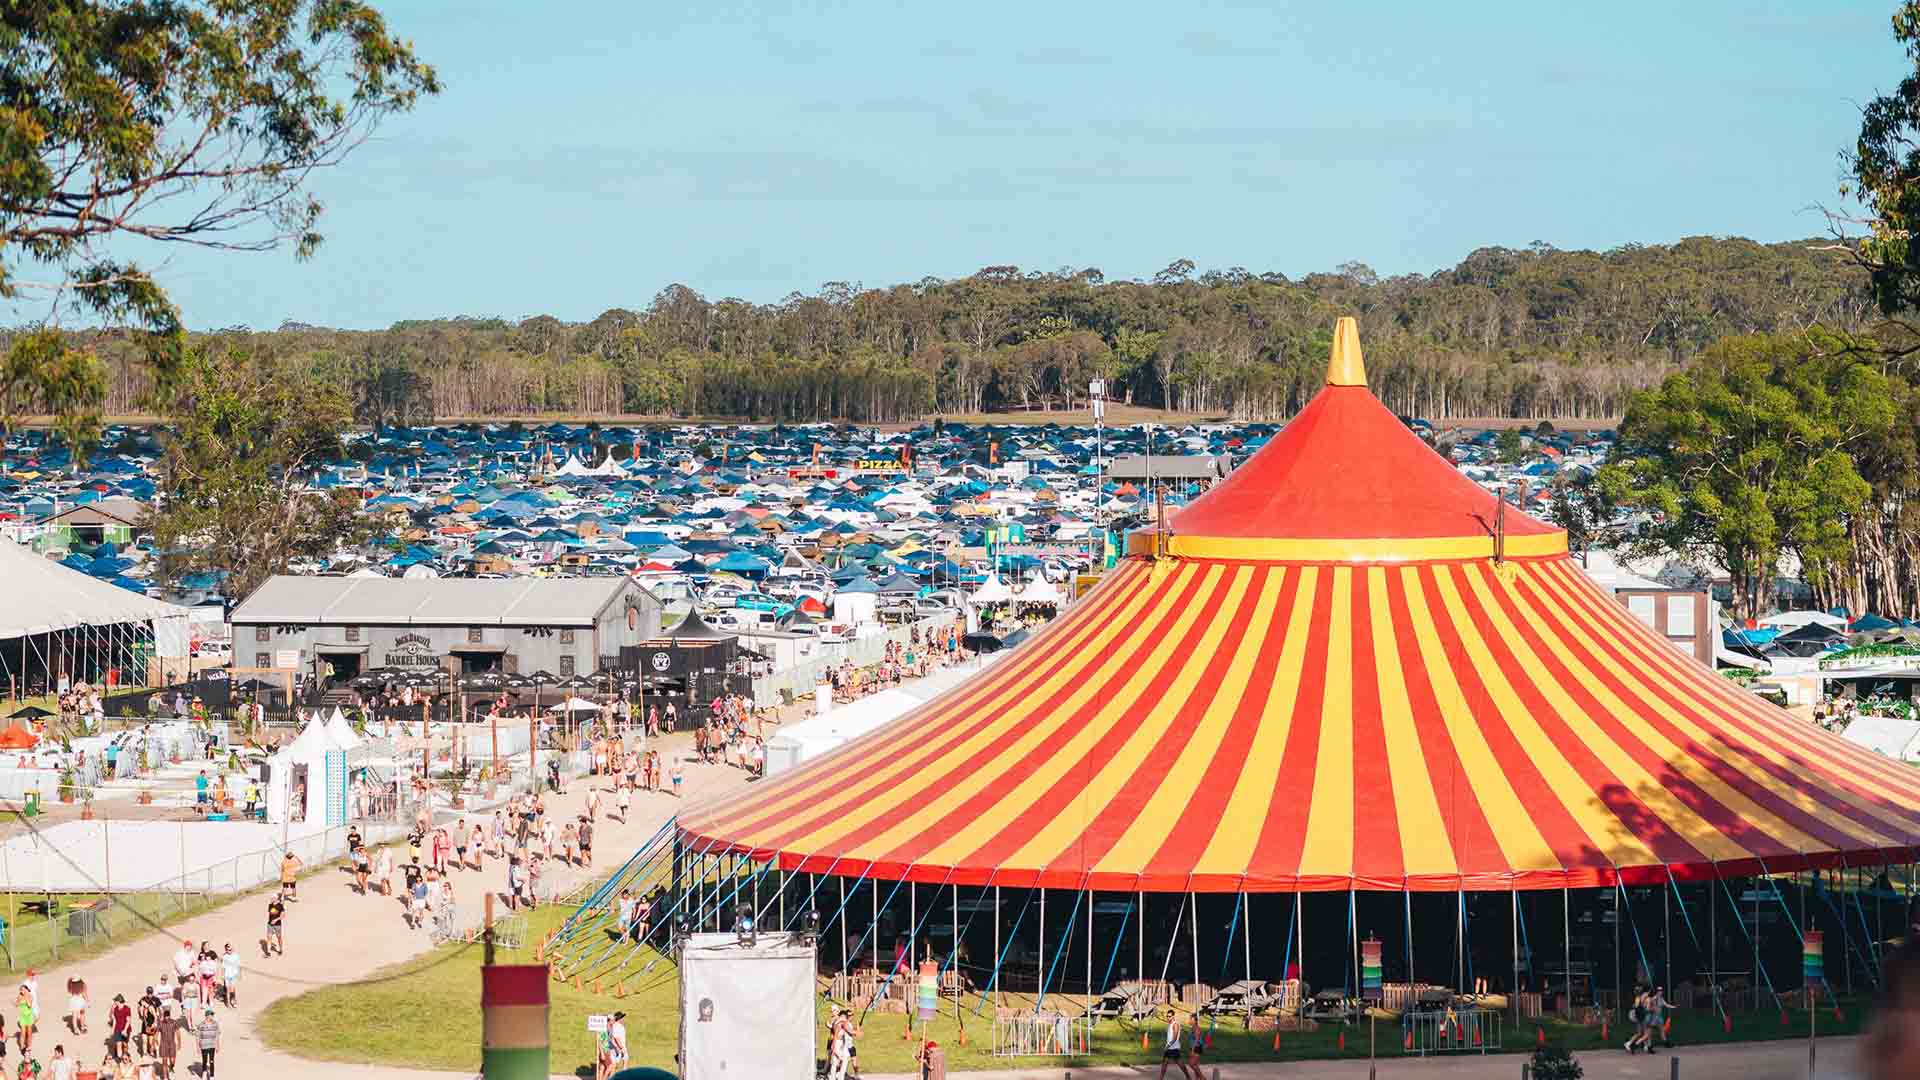 Falls Festival Is Moving to a New Victorian Location When It Returns at the End of 2022